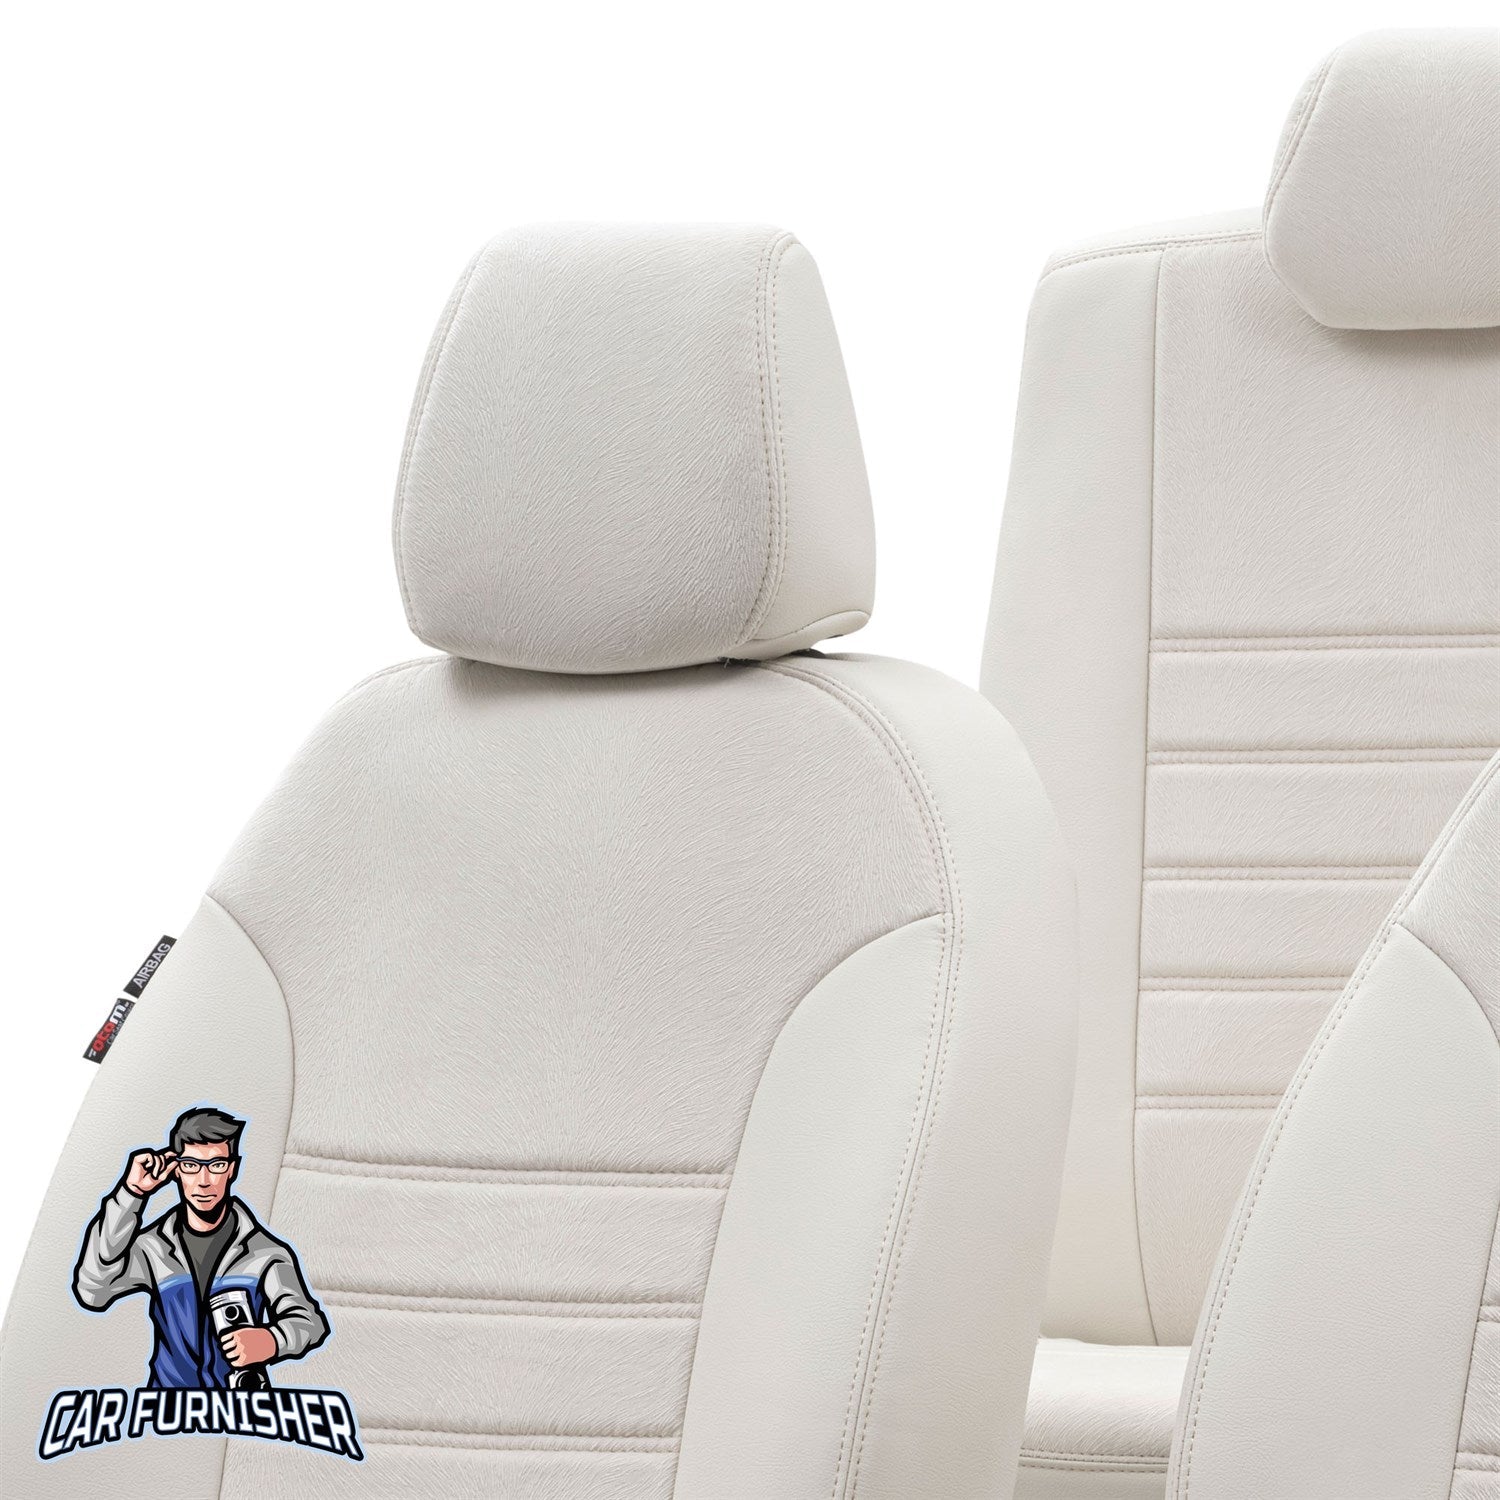 Down Under’s Finest: Ford Car Seat Covers Edition